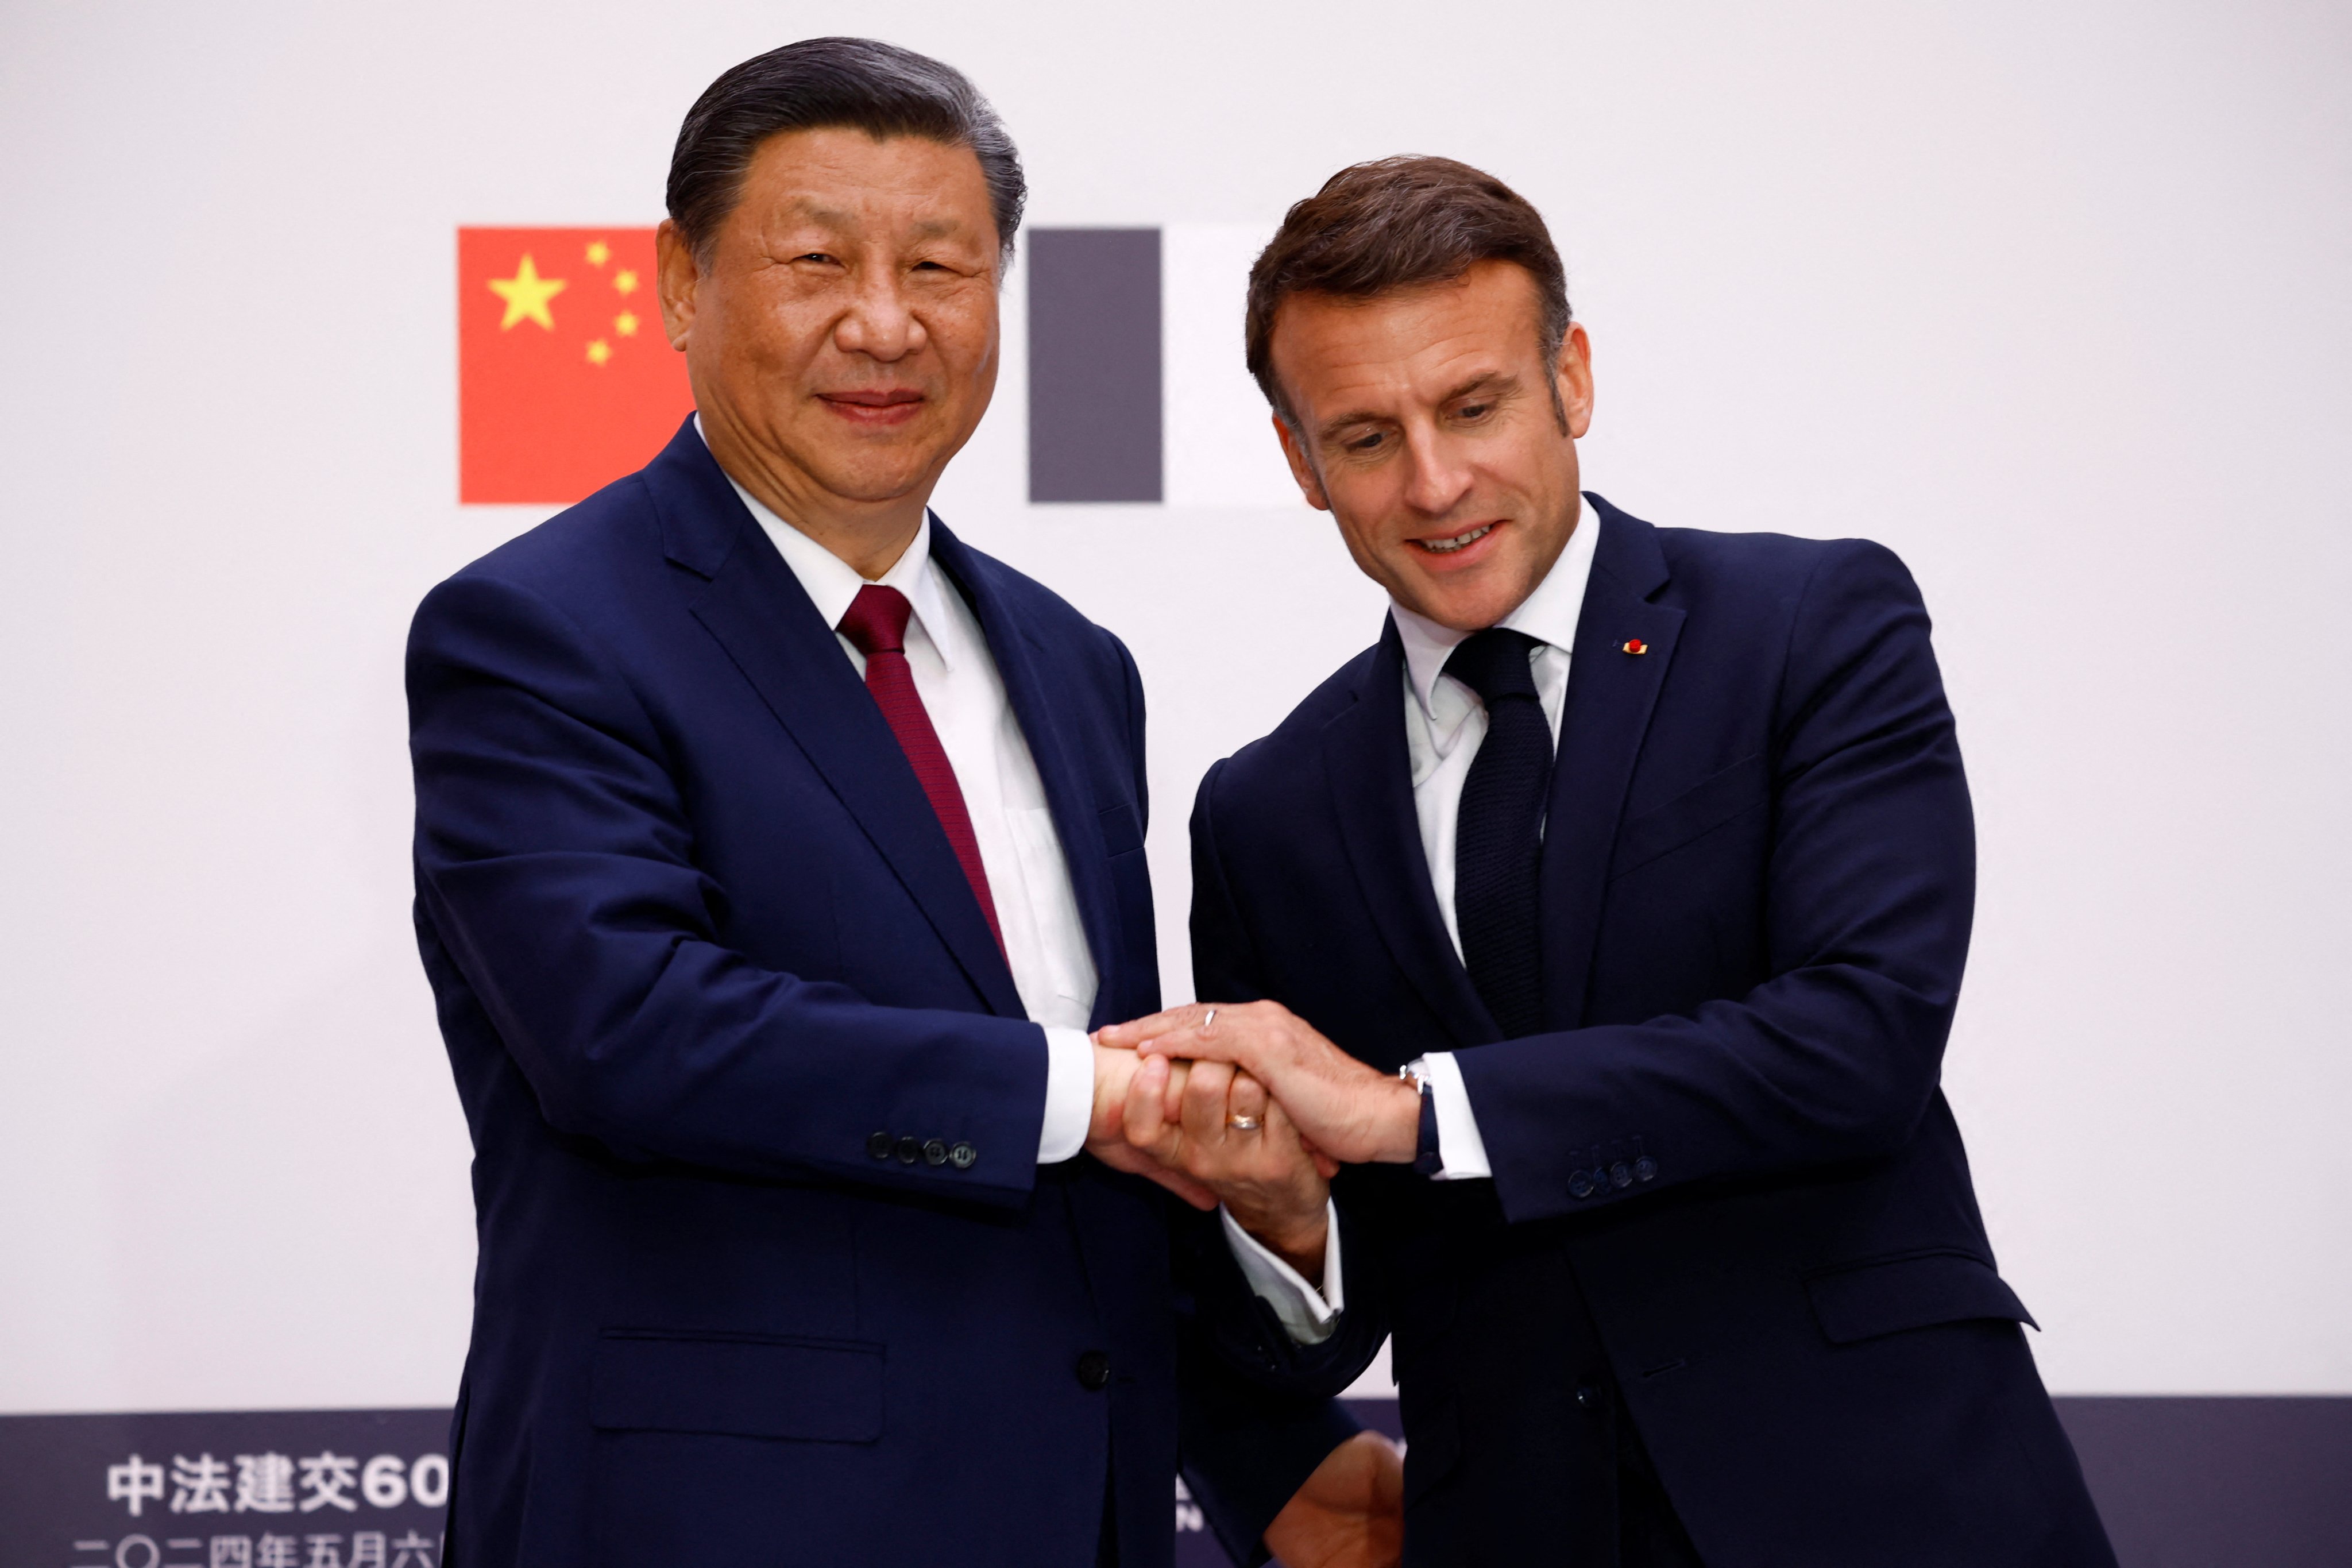 Chinese President Xi Jinping and French president Emmanuel Macron after a joint statement at the Elysee Palace in Paris on Monday. Photo: EPA-EFE